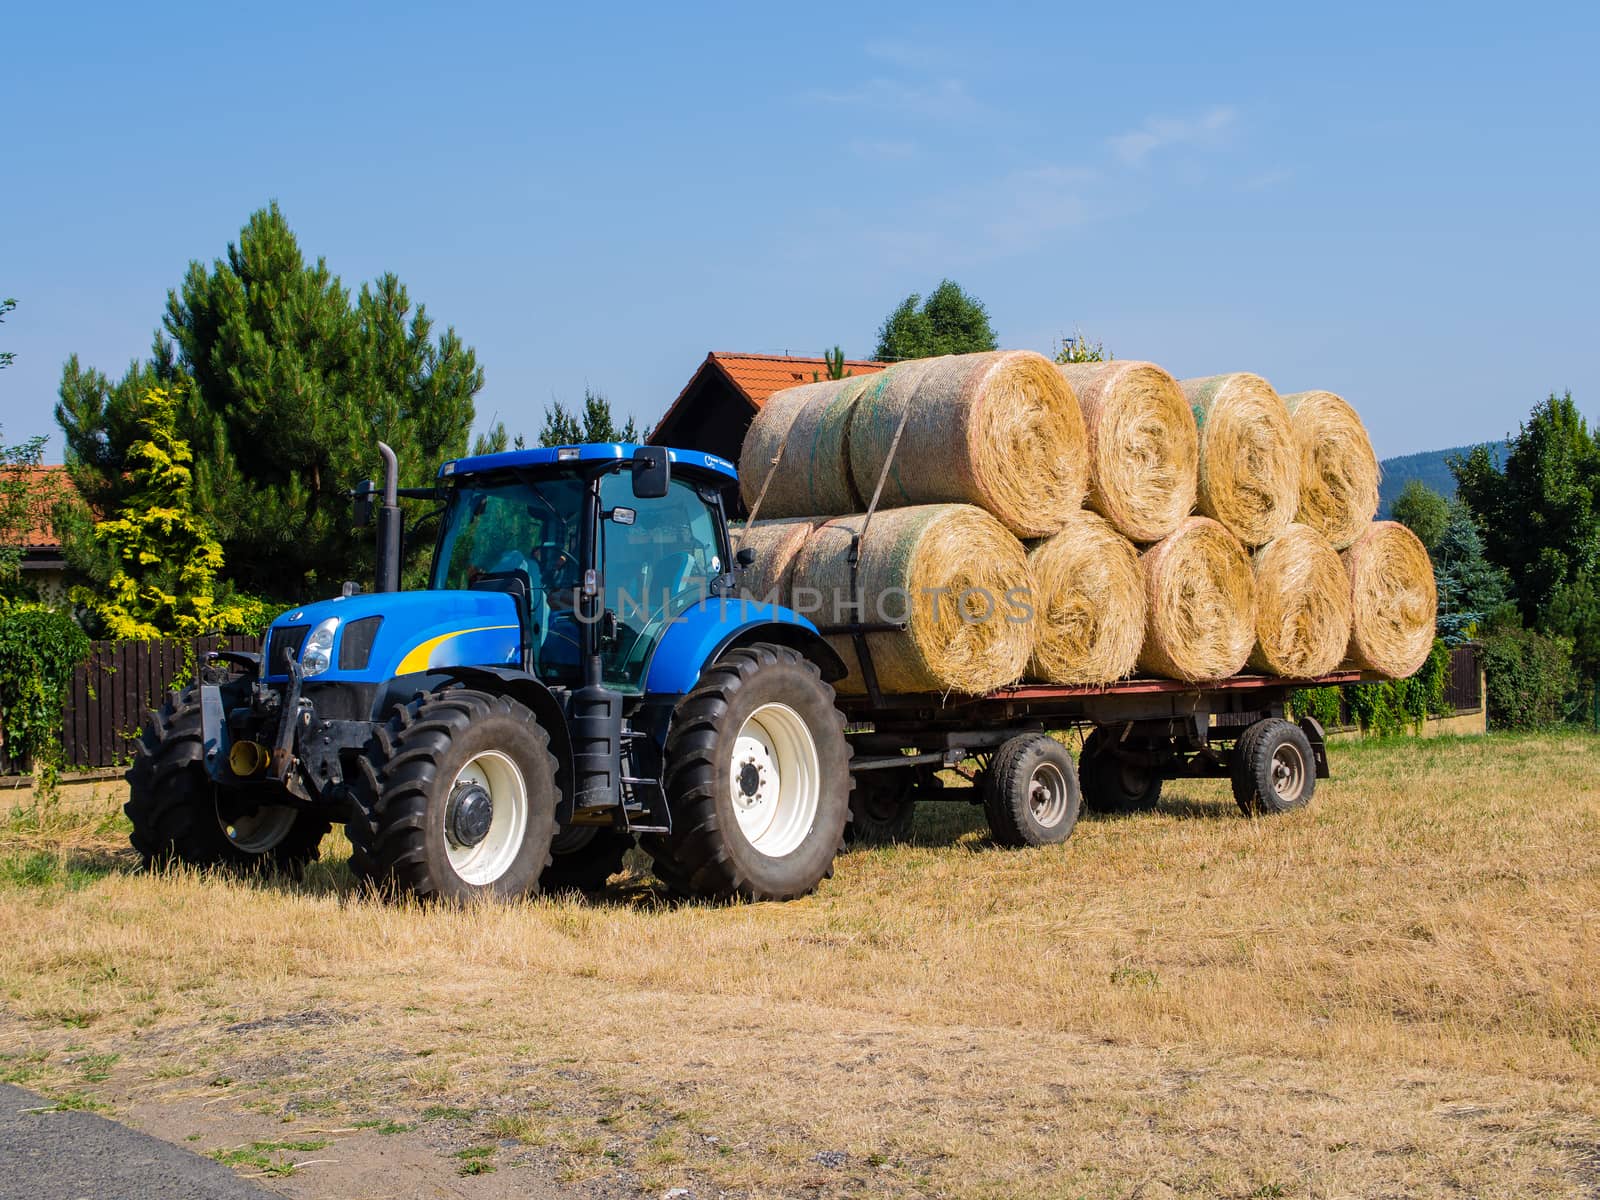 Blue tractor with wagon loaded with hay stacks during harvest time, copyspace on the bottom of the image